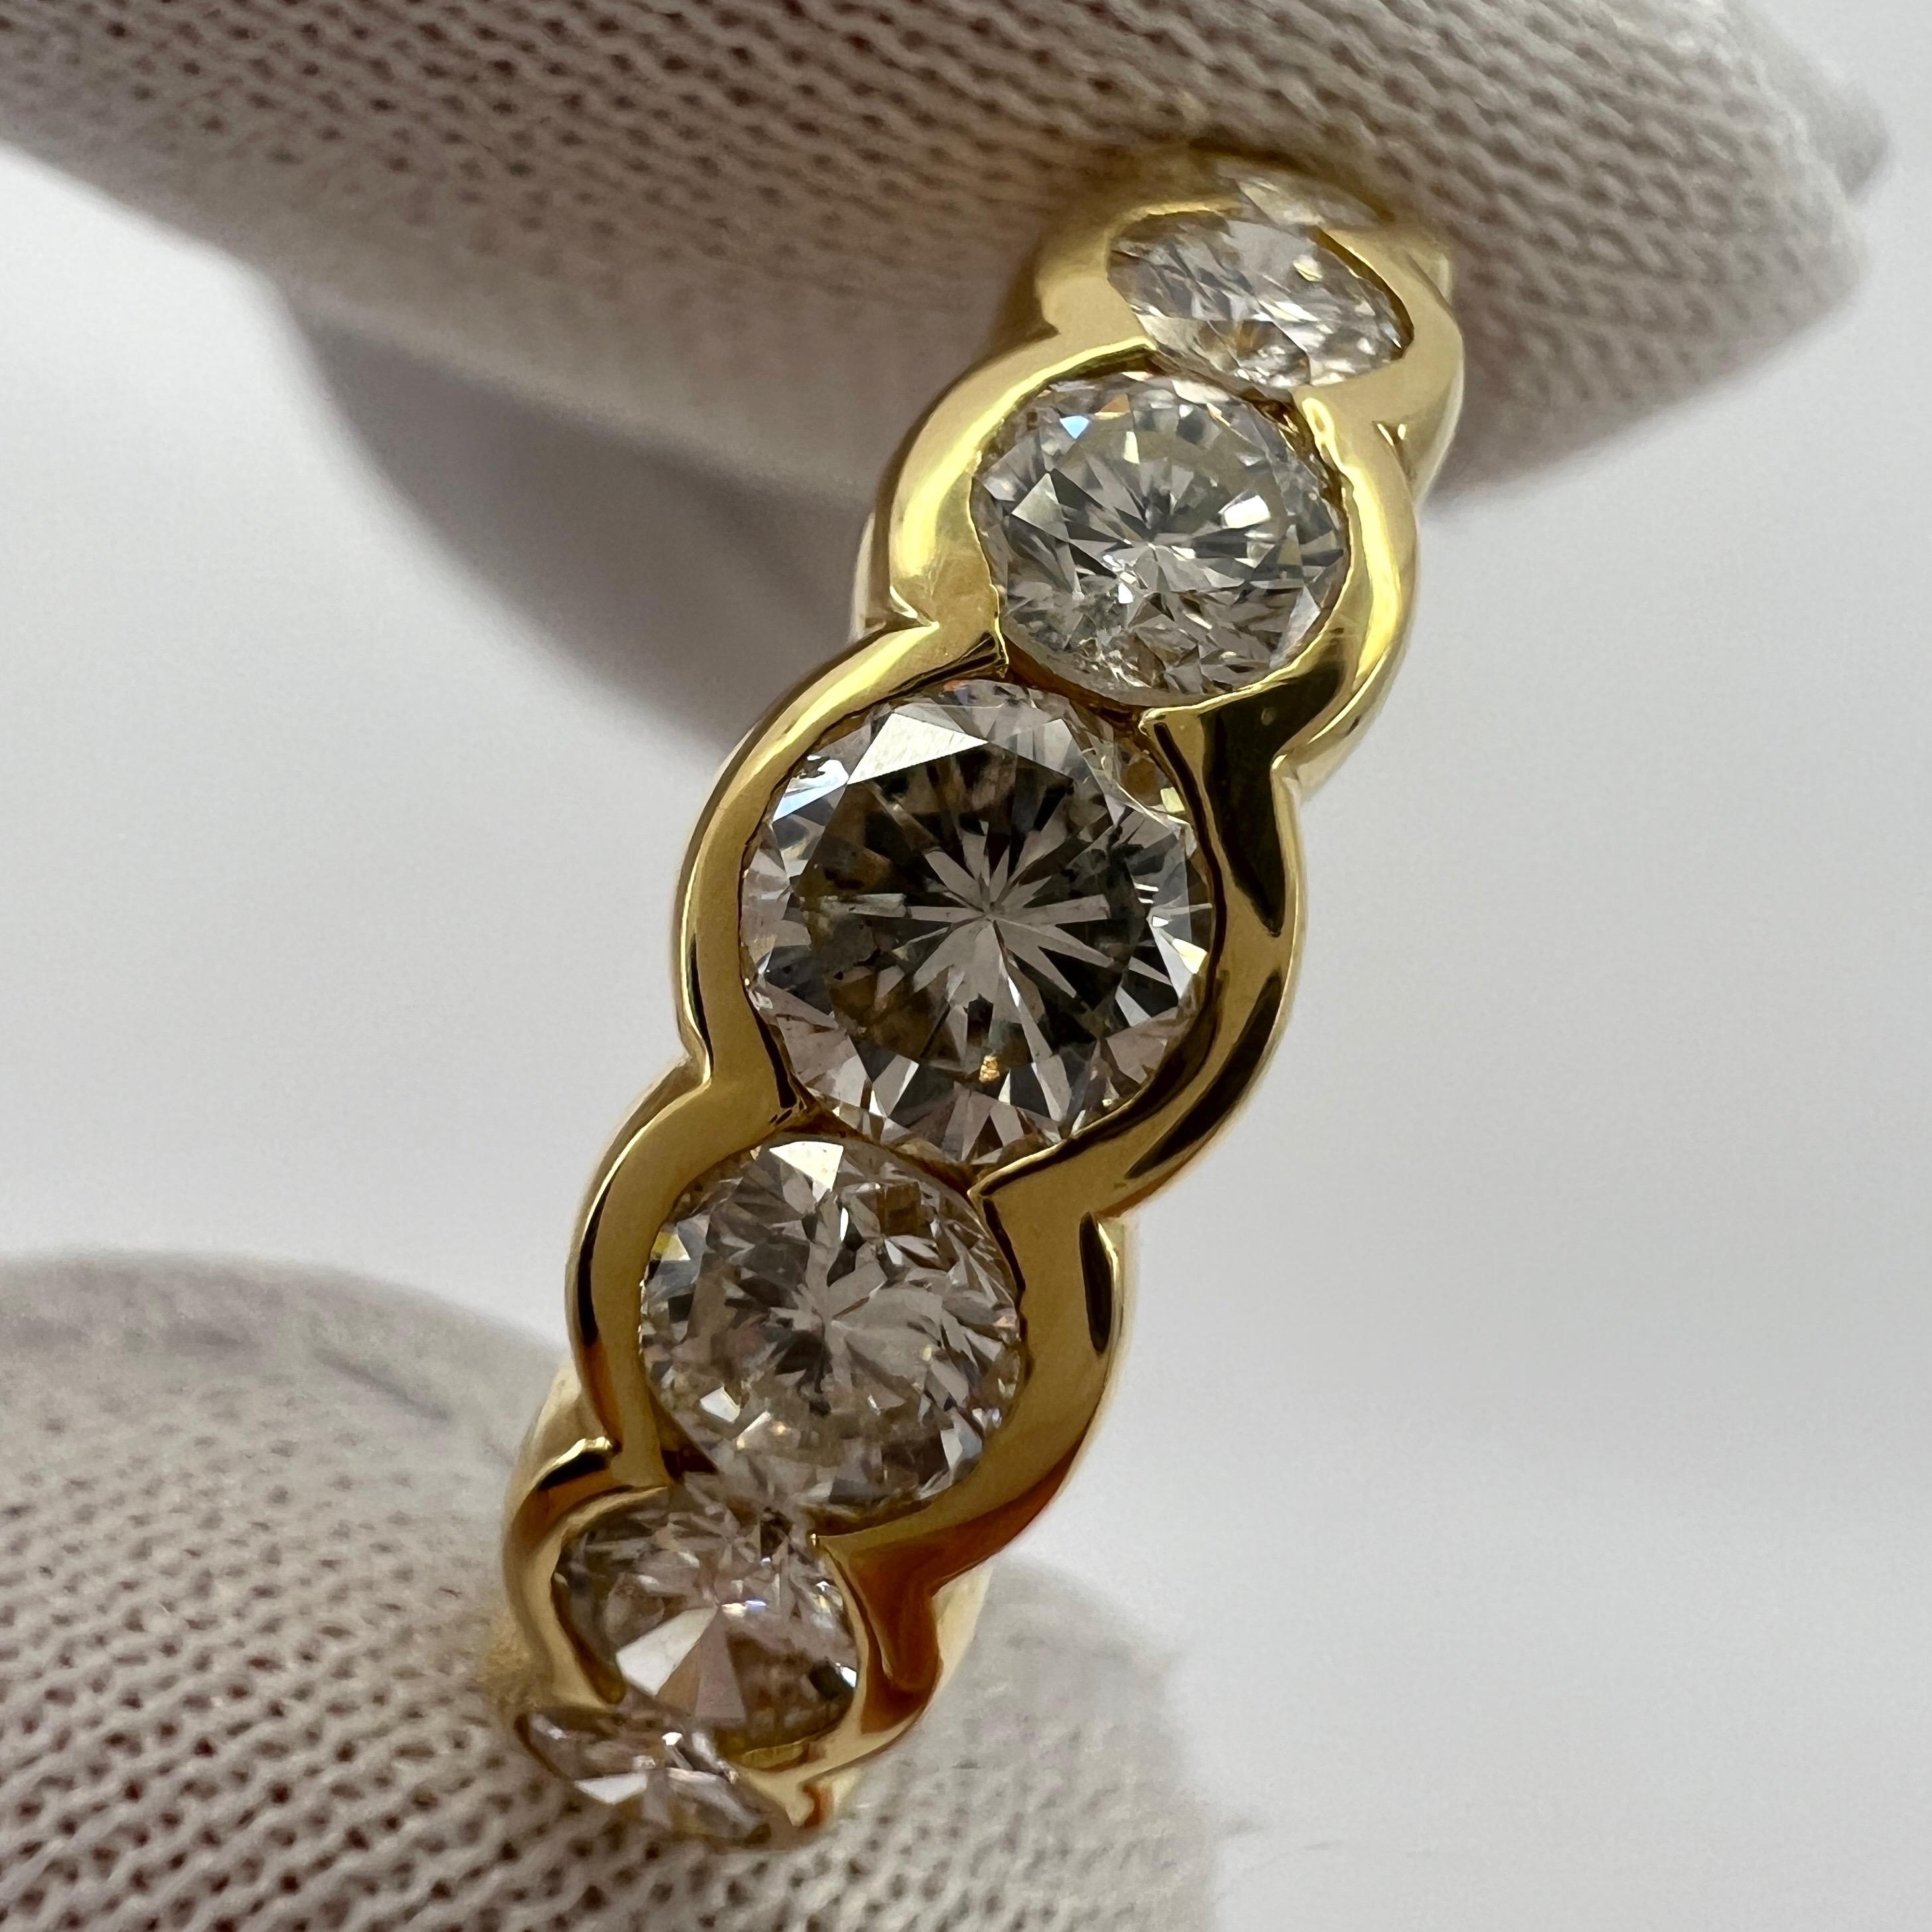 Natural Diamond Graduating Half Eternity Seven Stone 18k Yellow Gold Ring.

This beautifully made ring features seven round brilliant cut diamonds in a graduating half eternity style.
The diamonds total 1.00 carat. All with an excellent round